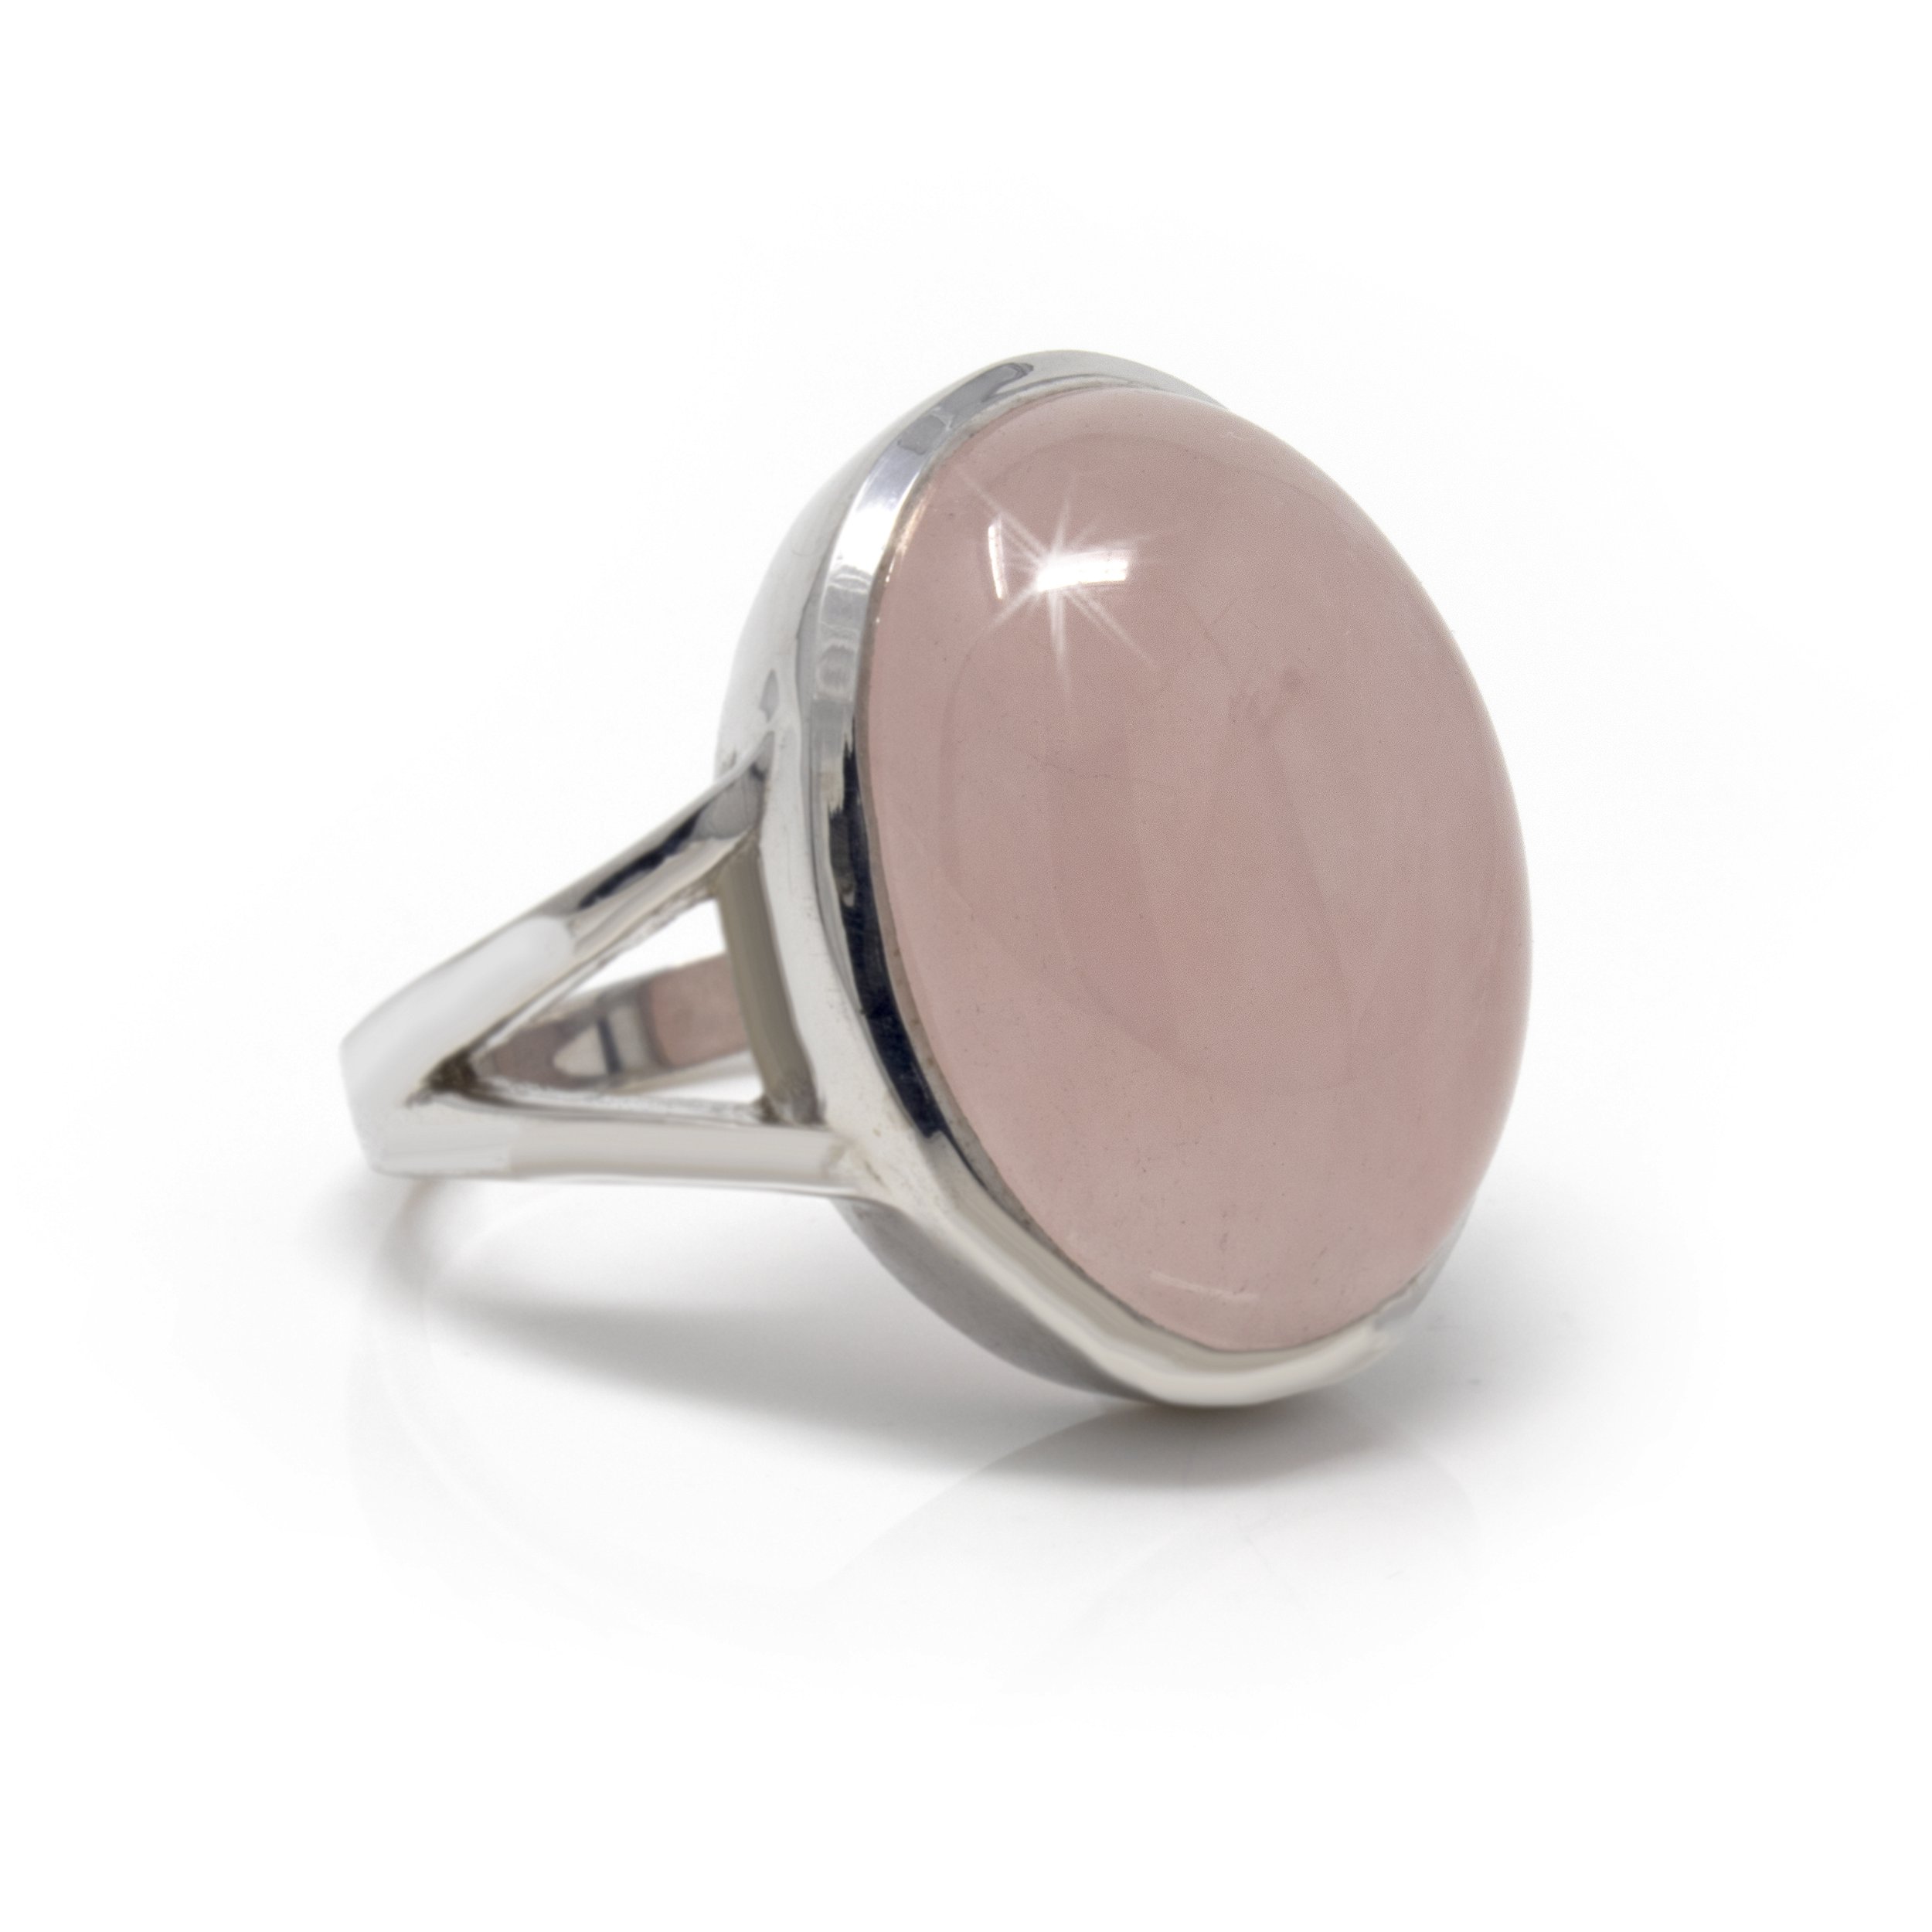 Rose Quartz Ring Size 7 - Simple Oval Cabochon With Tall Silver Bezel & Narrow Cut Out On Band Top